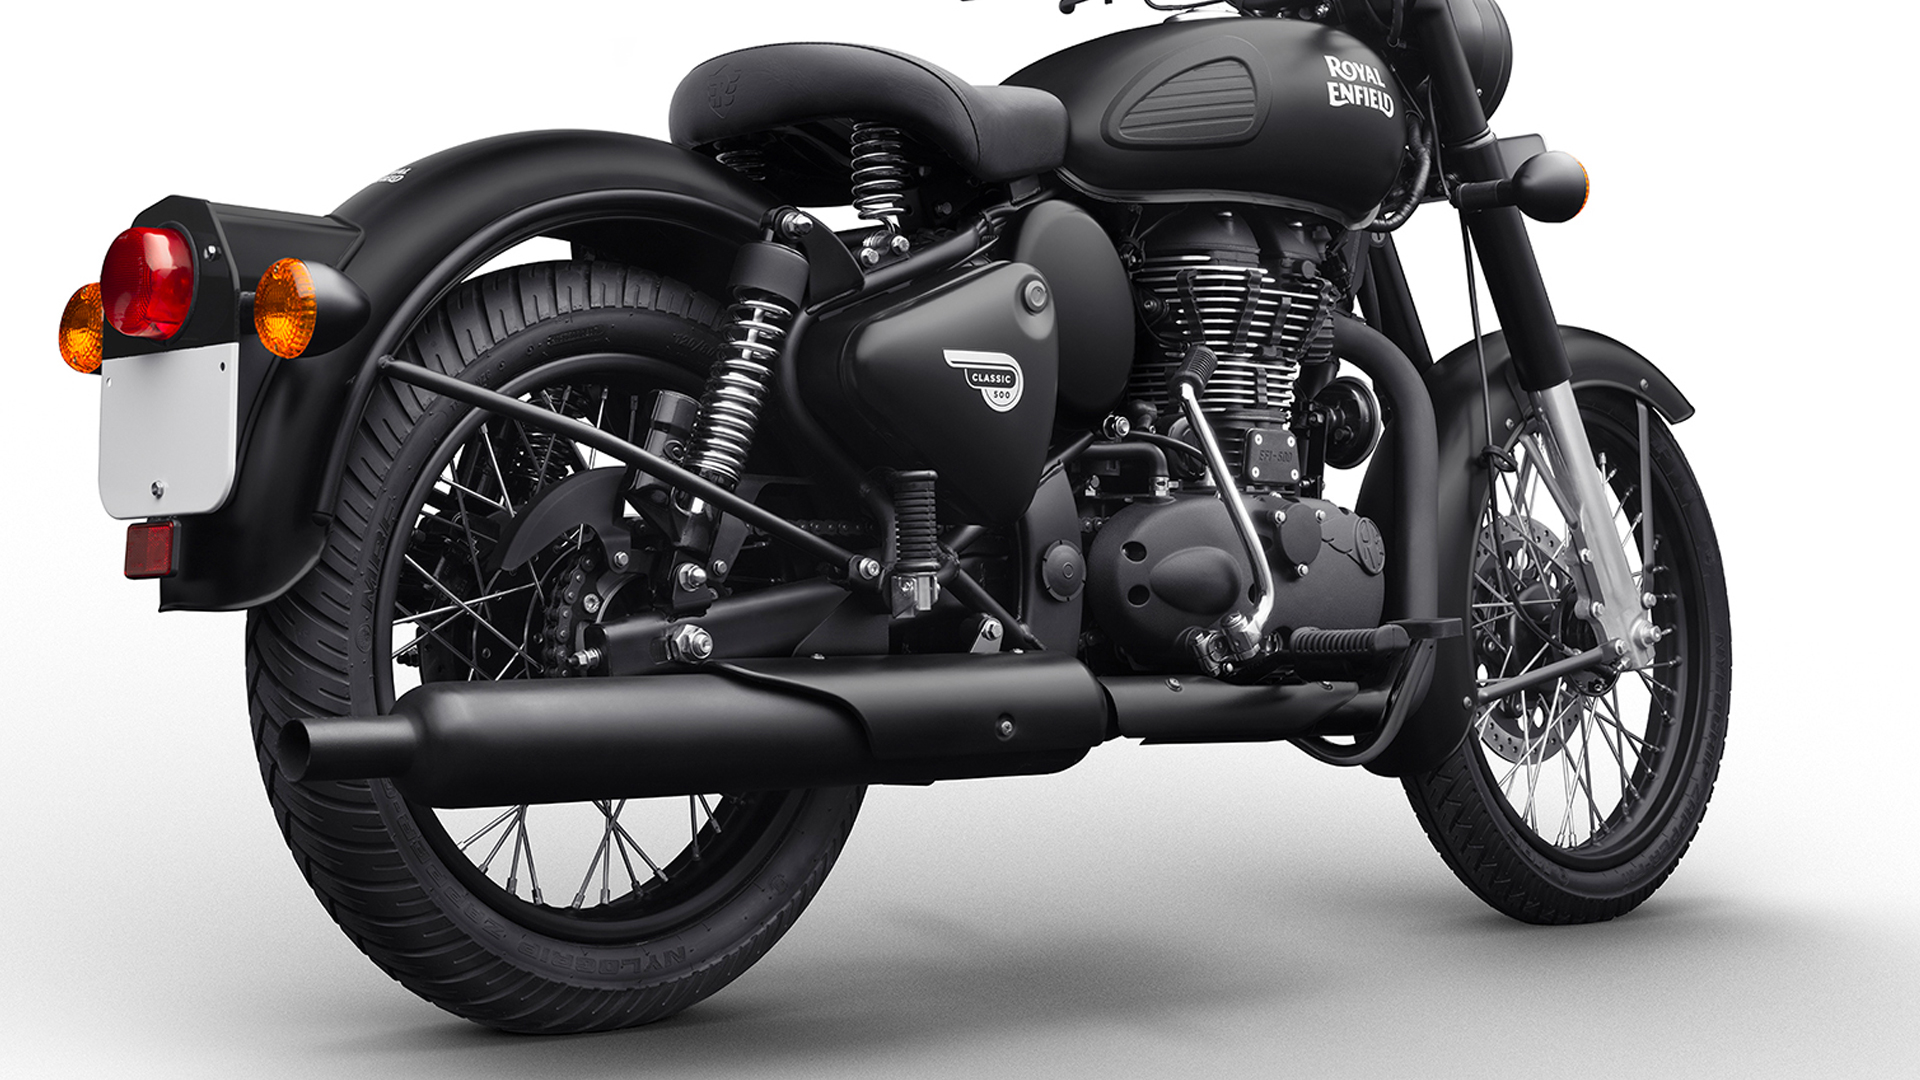 Royal Enfield Classic 500 2017 Stealth Black